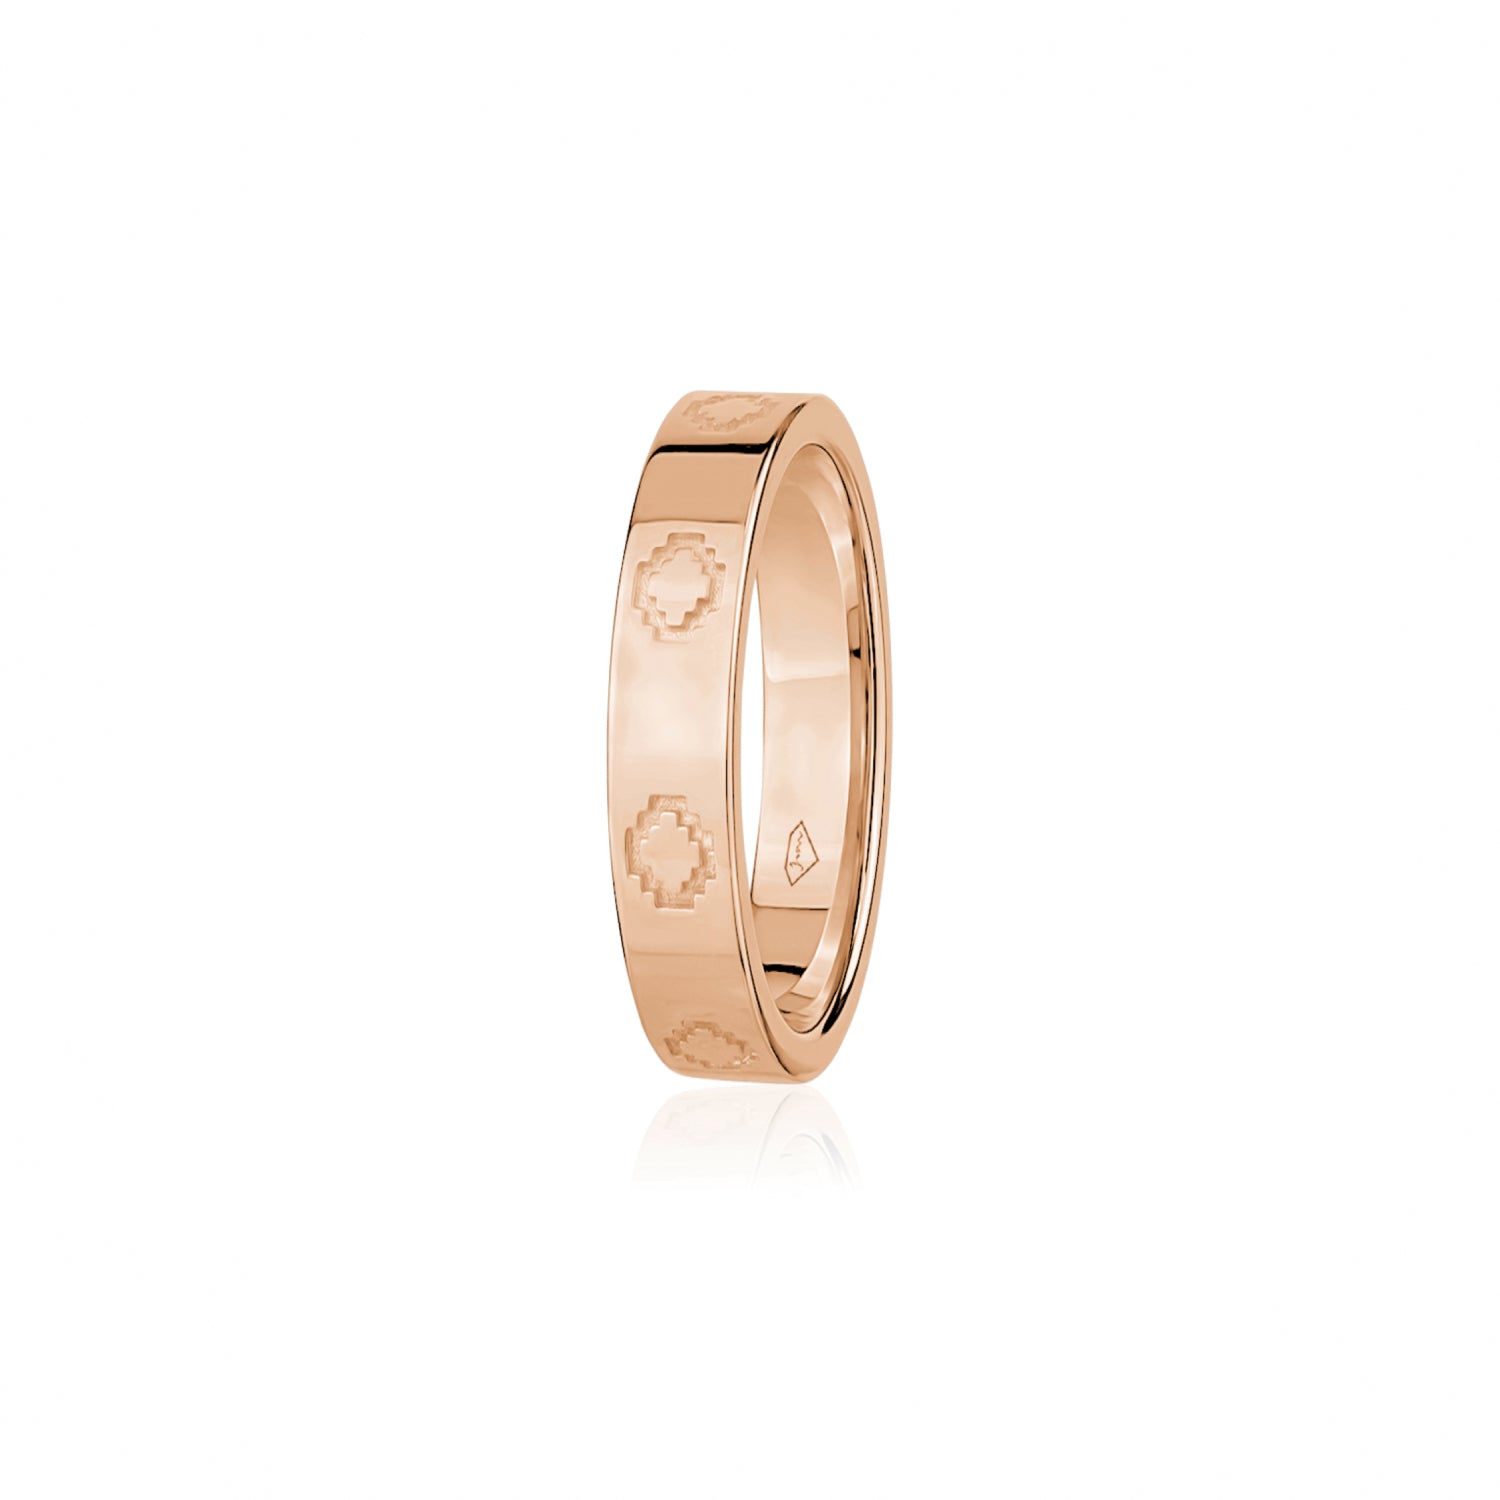 Step Motif Polished Finish Square Edge Wedding Band in Rose Gold Side View